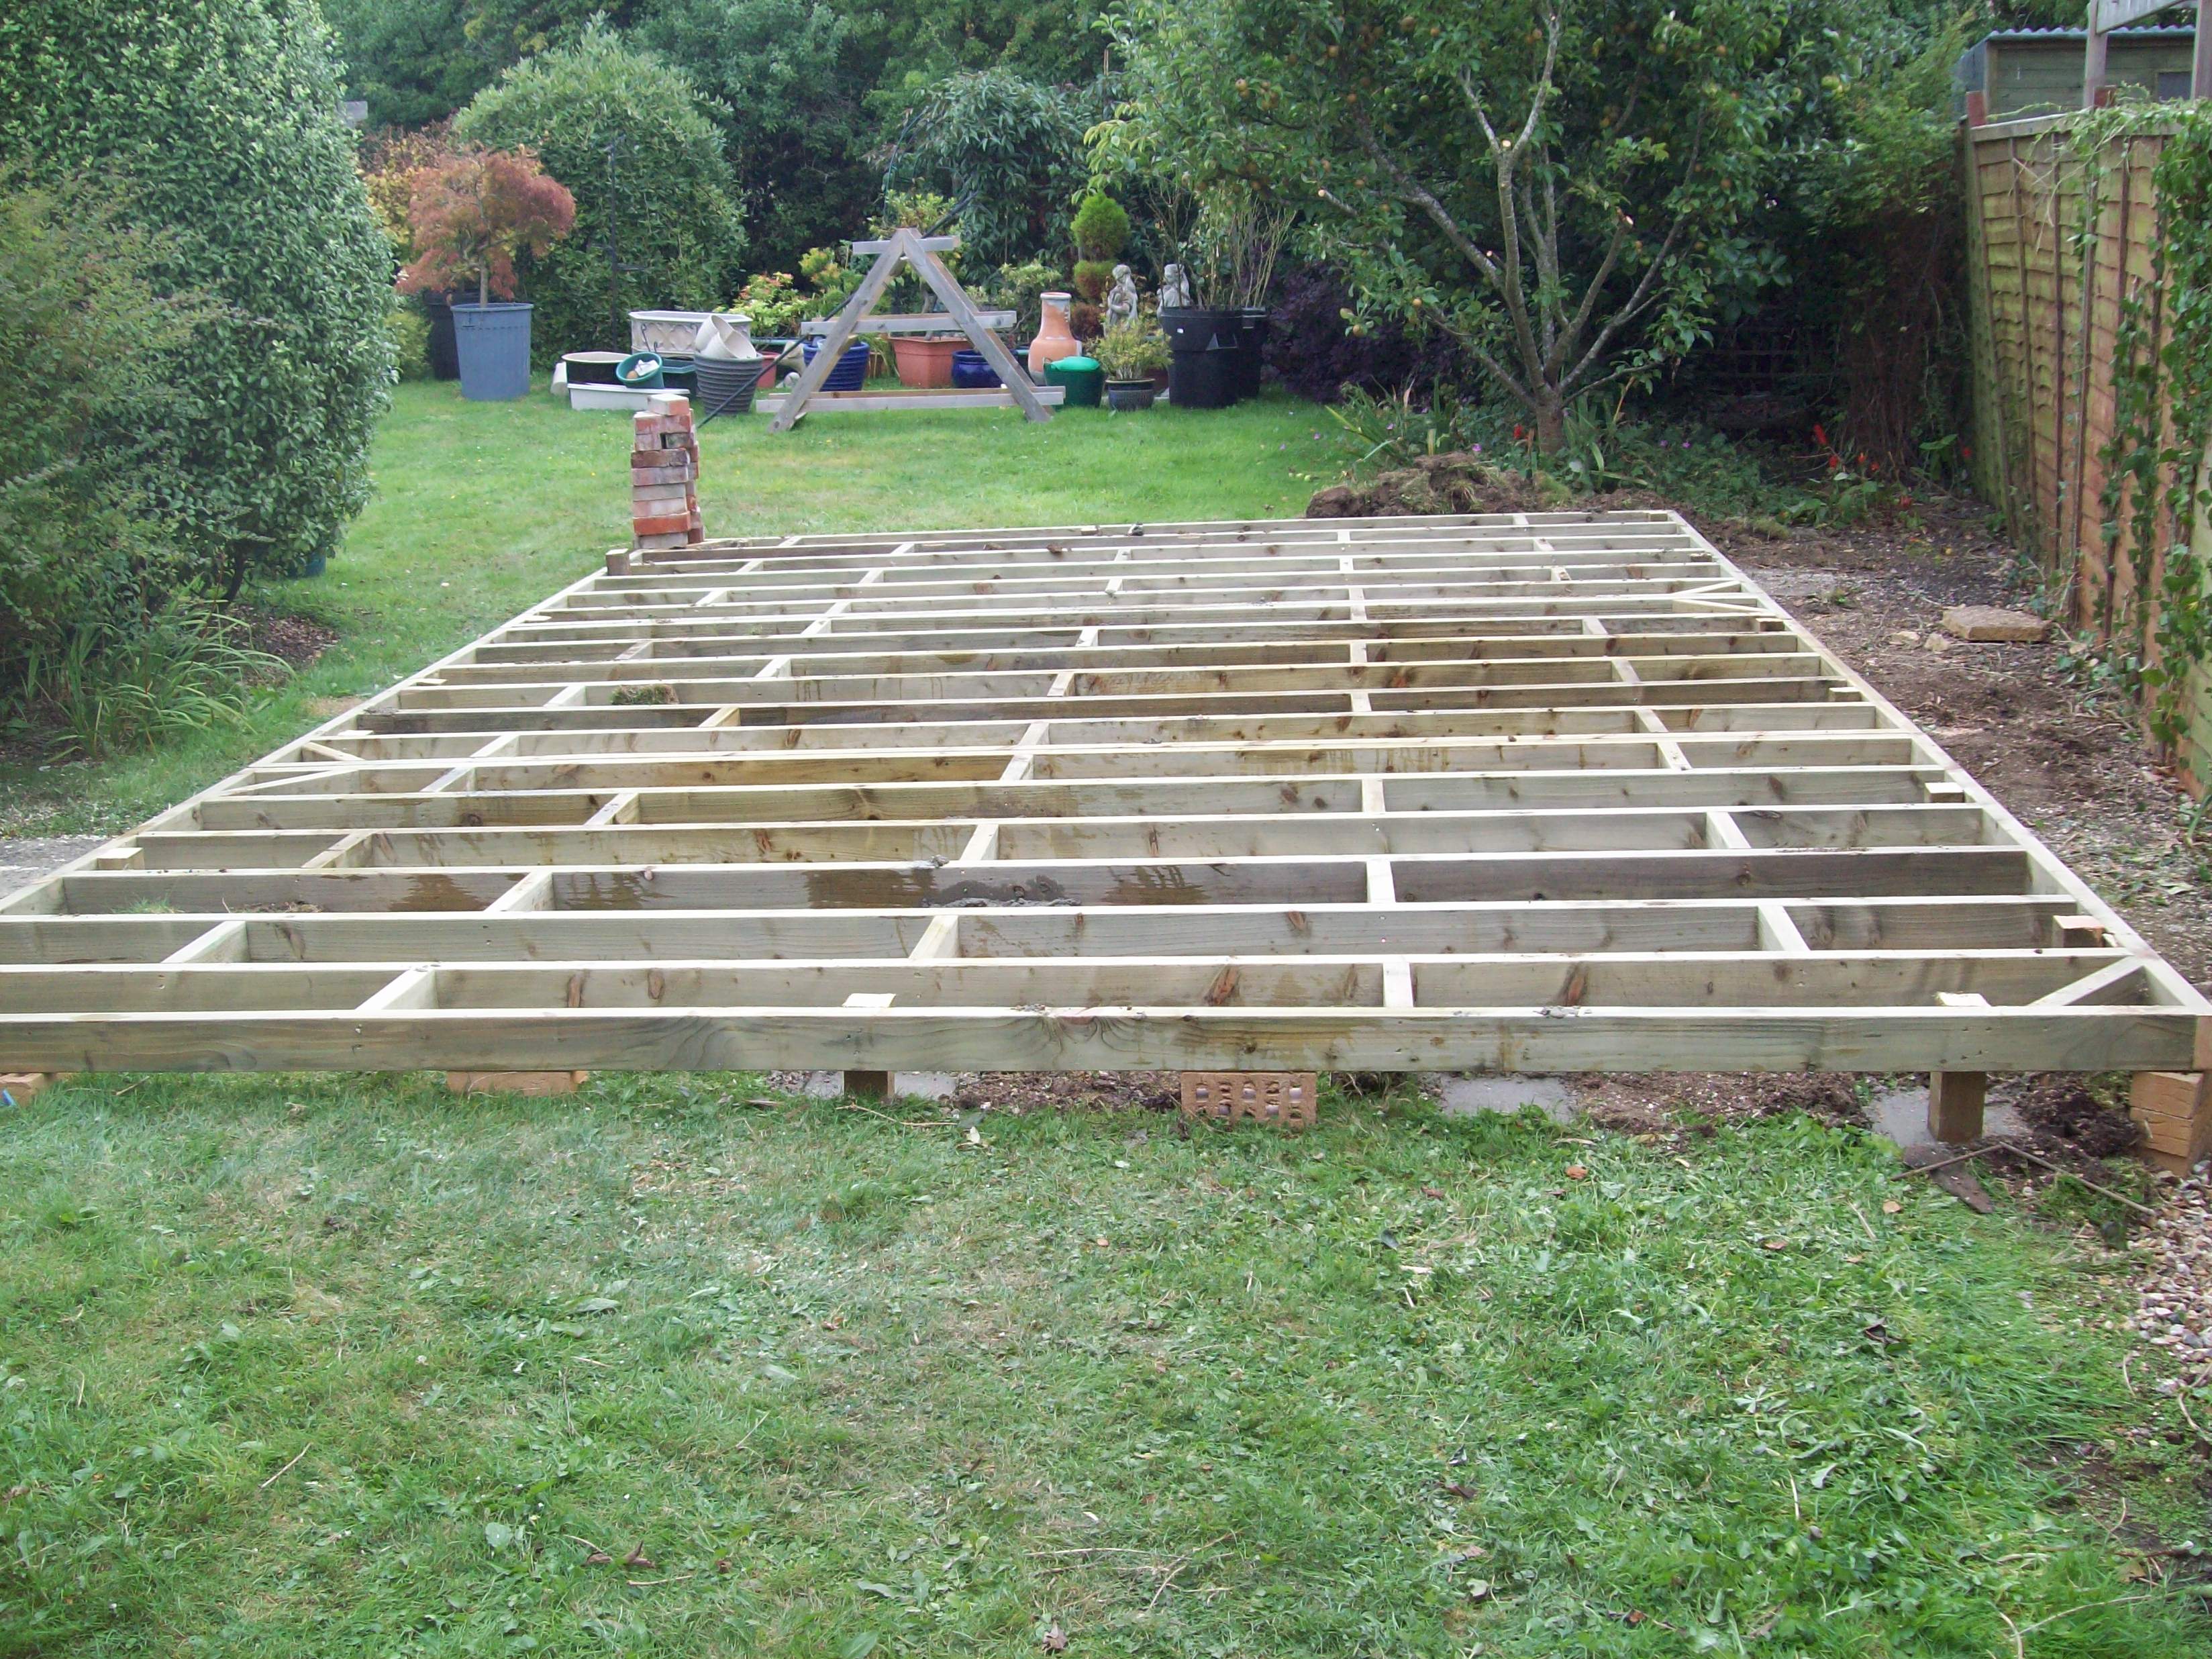 TIMBER BASES AND IDEAL SOLUTION FOR UN LEVEL GROUND PLEASE CONTACT US IF YOU WOULD LIKE A QUOTATION ON 01308 861144